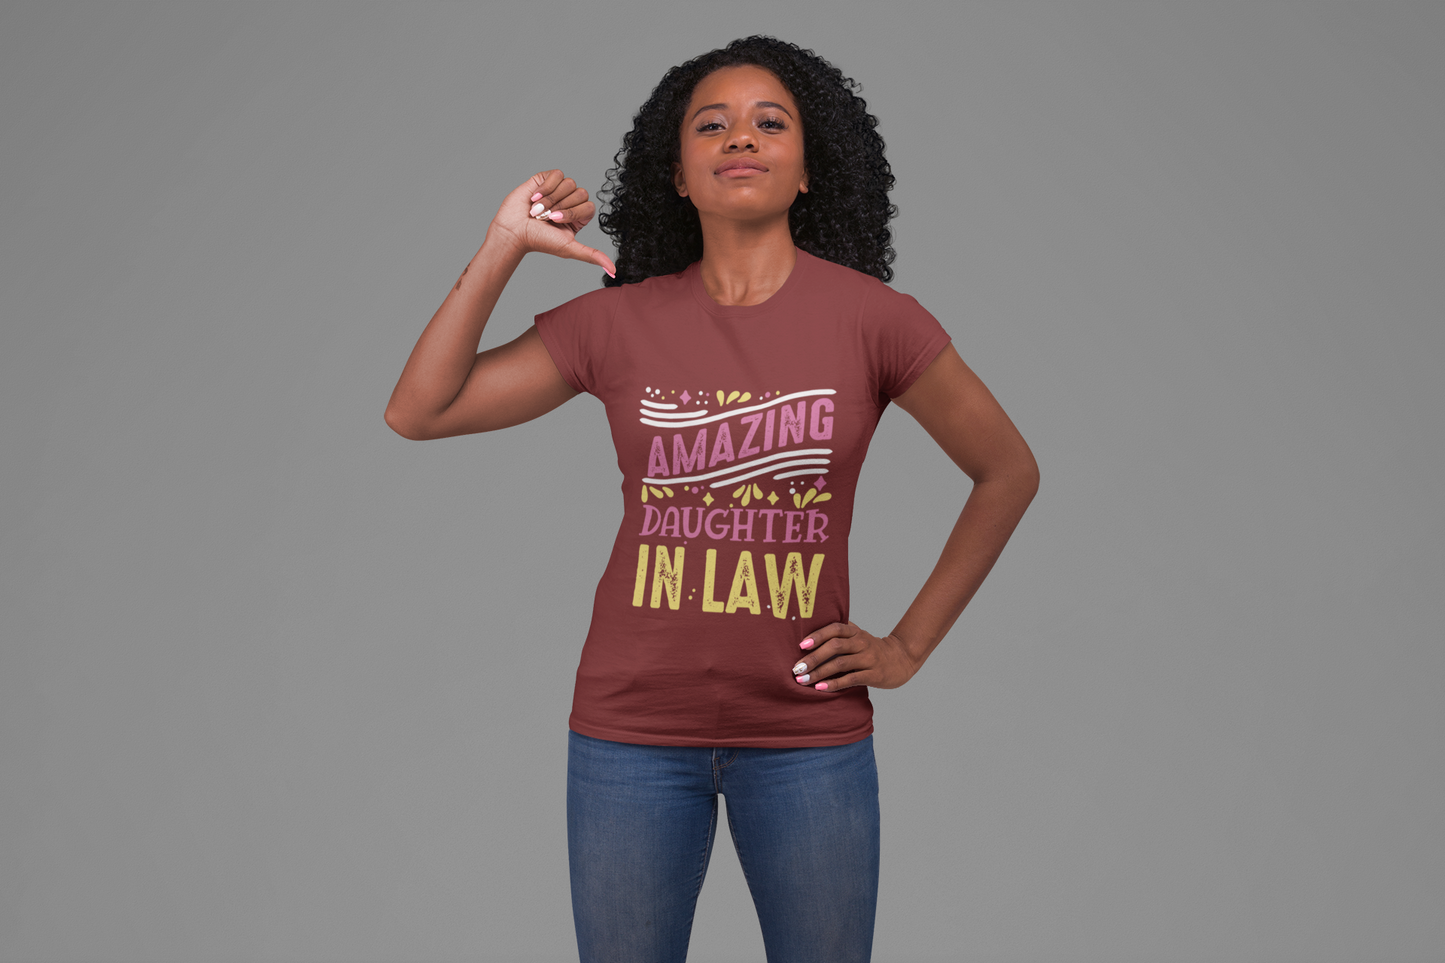 Amazing Daughter in Law, Family Shirts, Family Reunion Shirts, Trendy Shirts